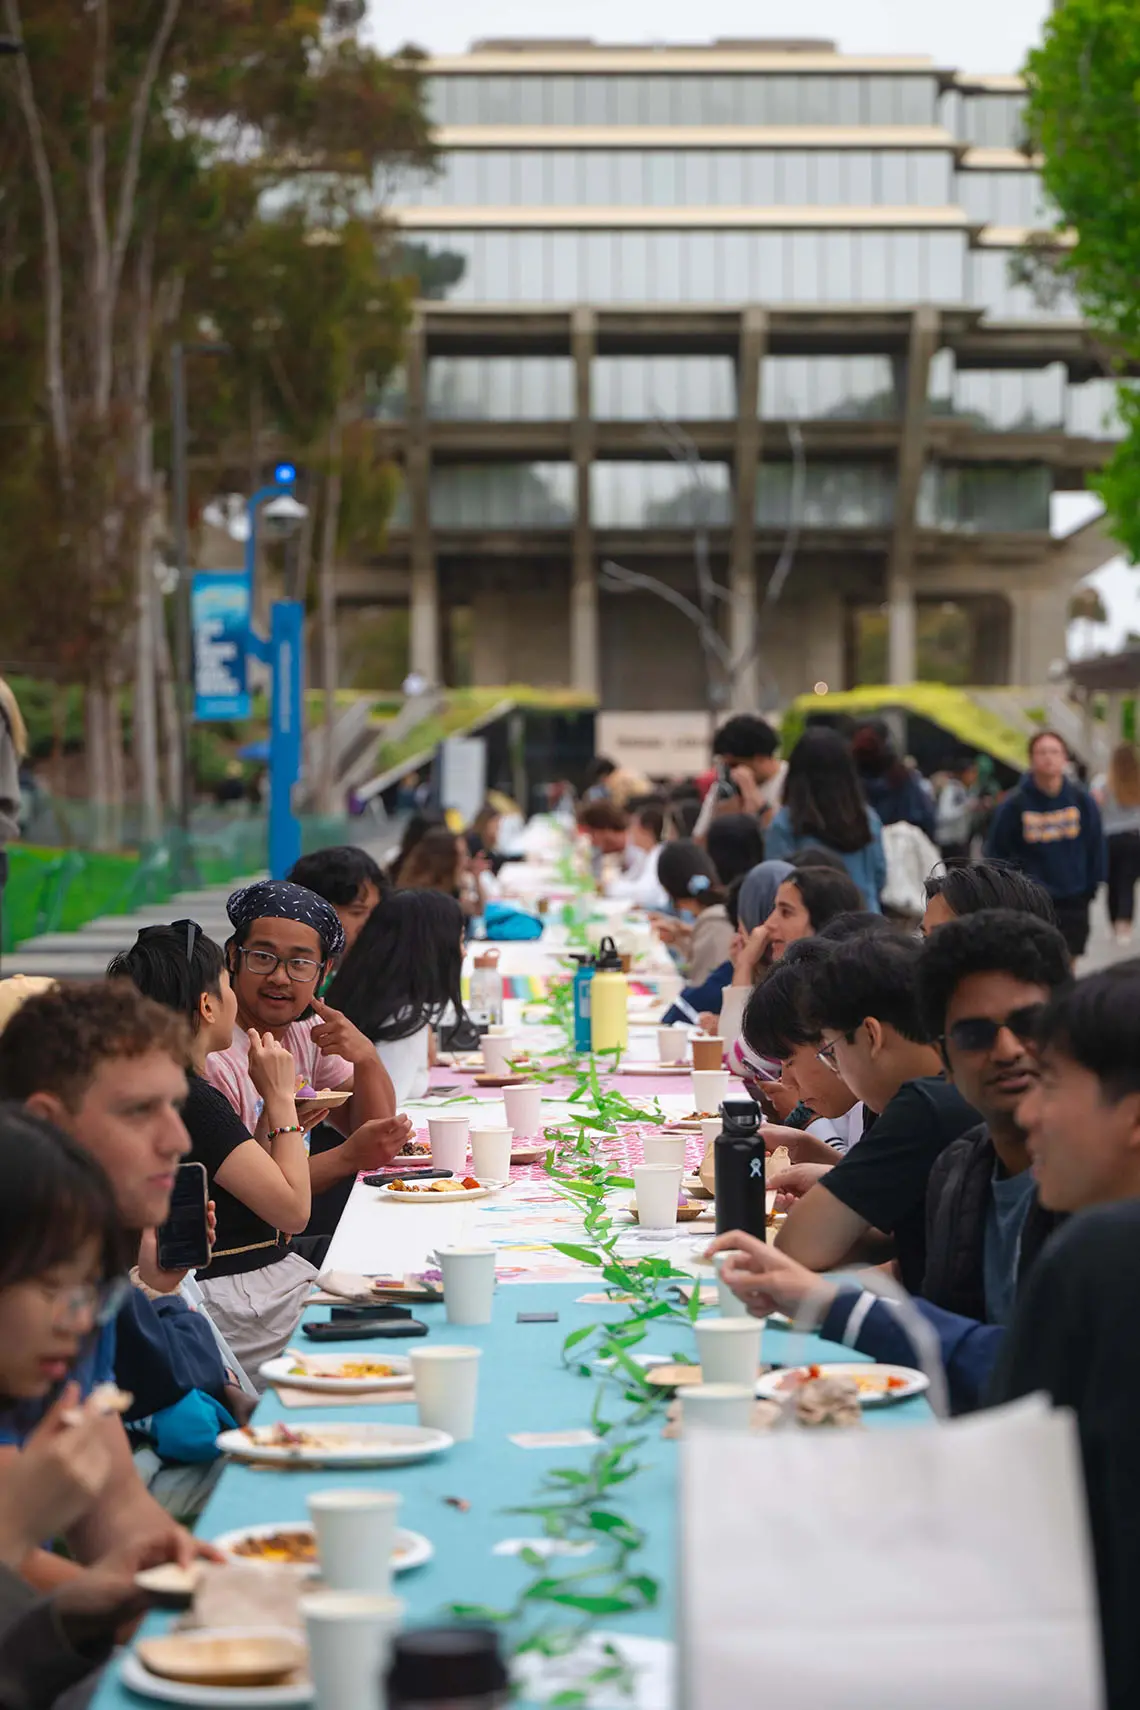 Community members gather around long table in front of Geisel Library